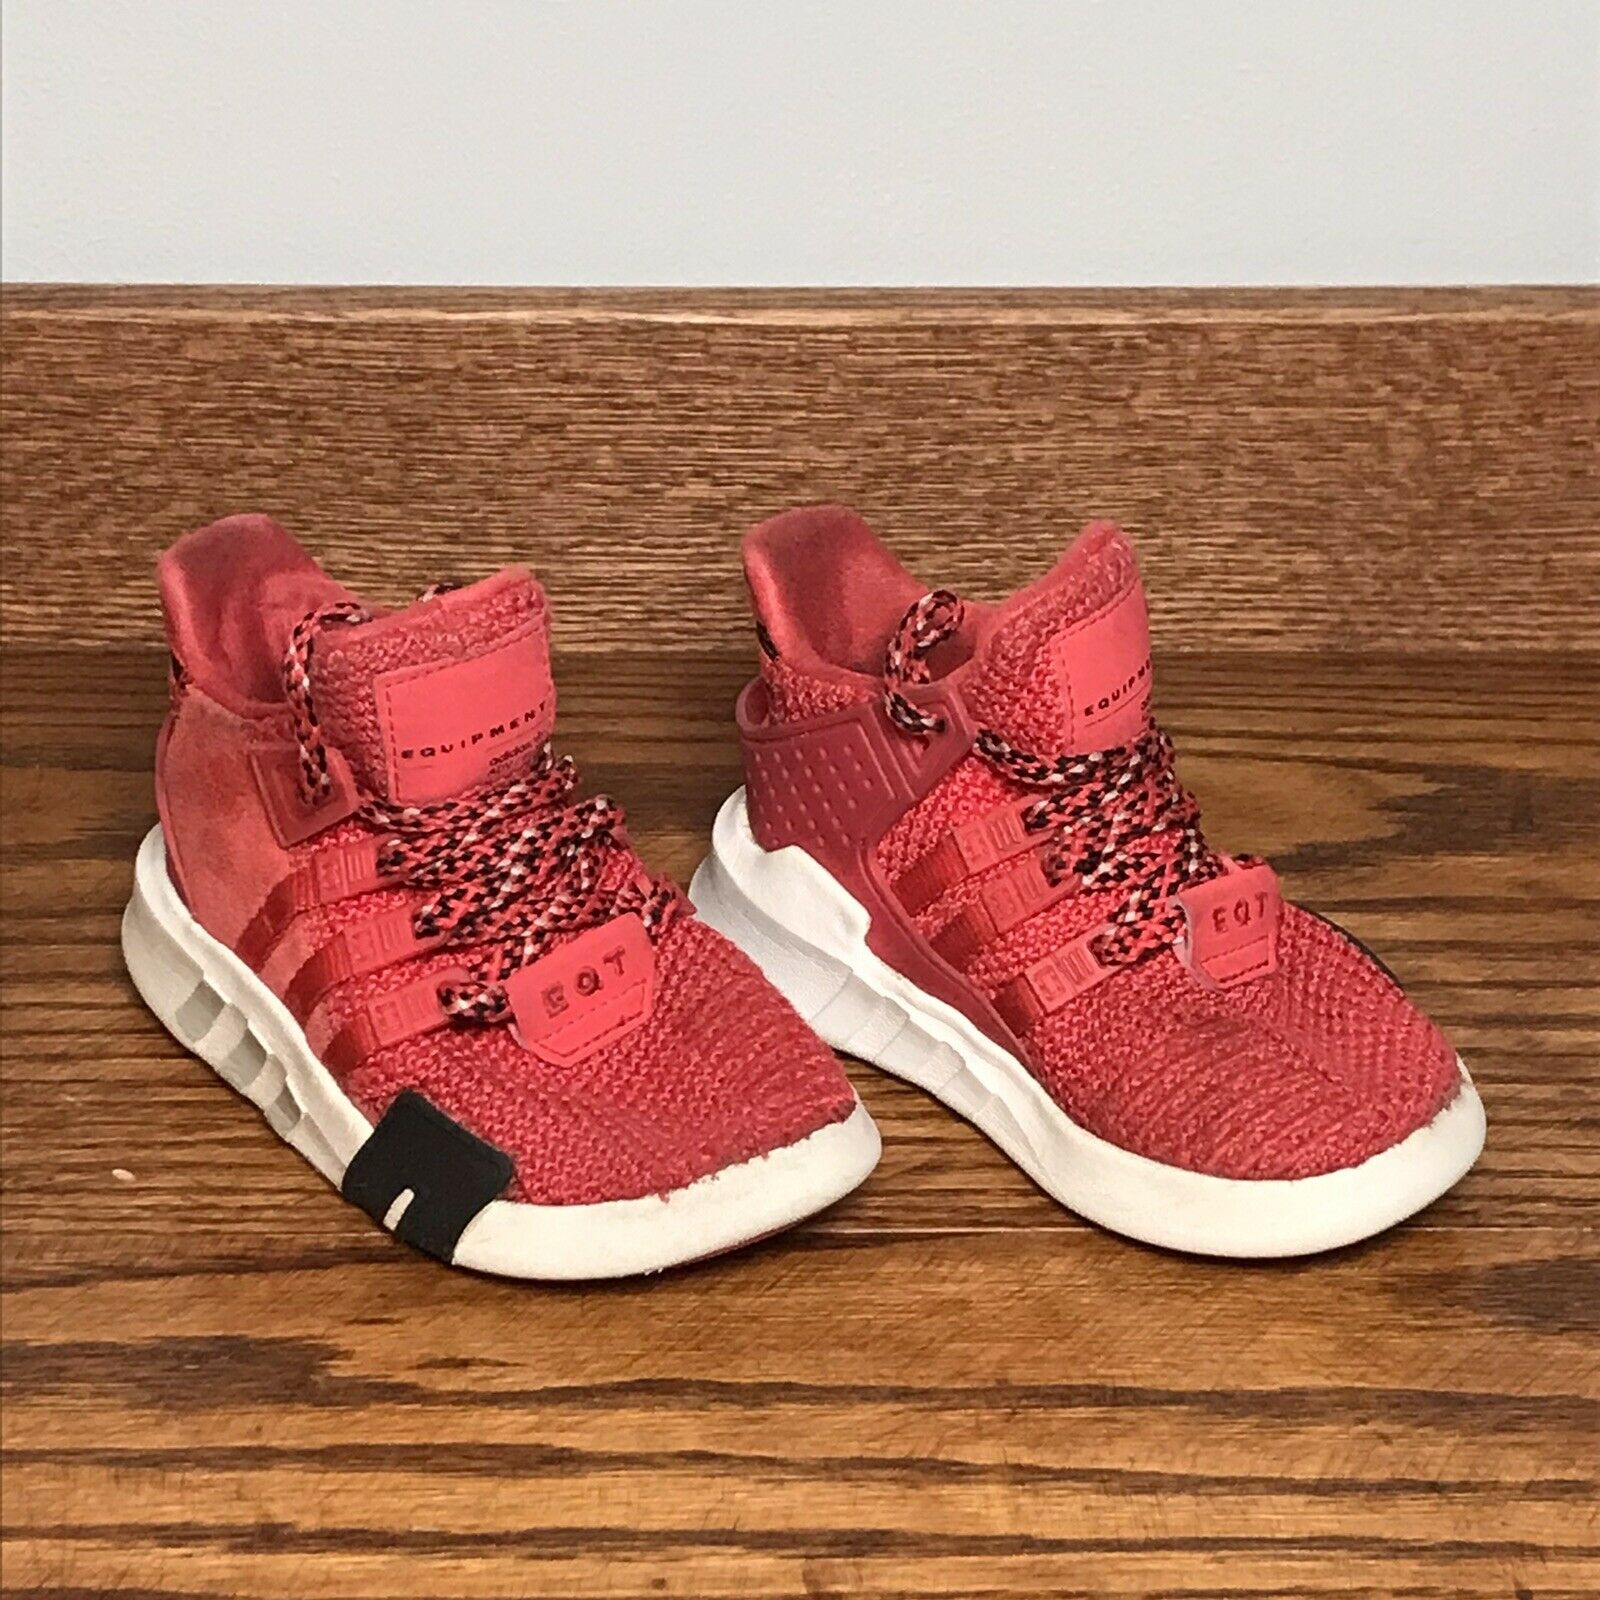 Adidas EQT Support ADV Baby Toddlers Shoes Size 8k Red